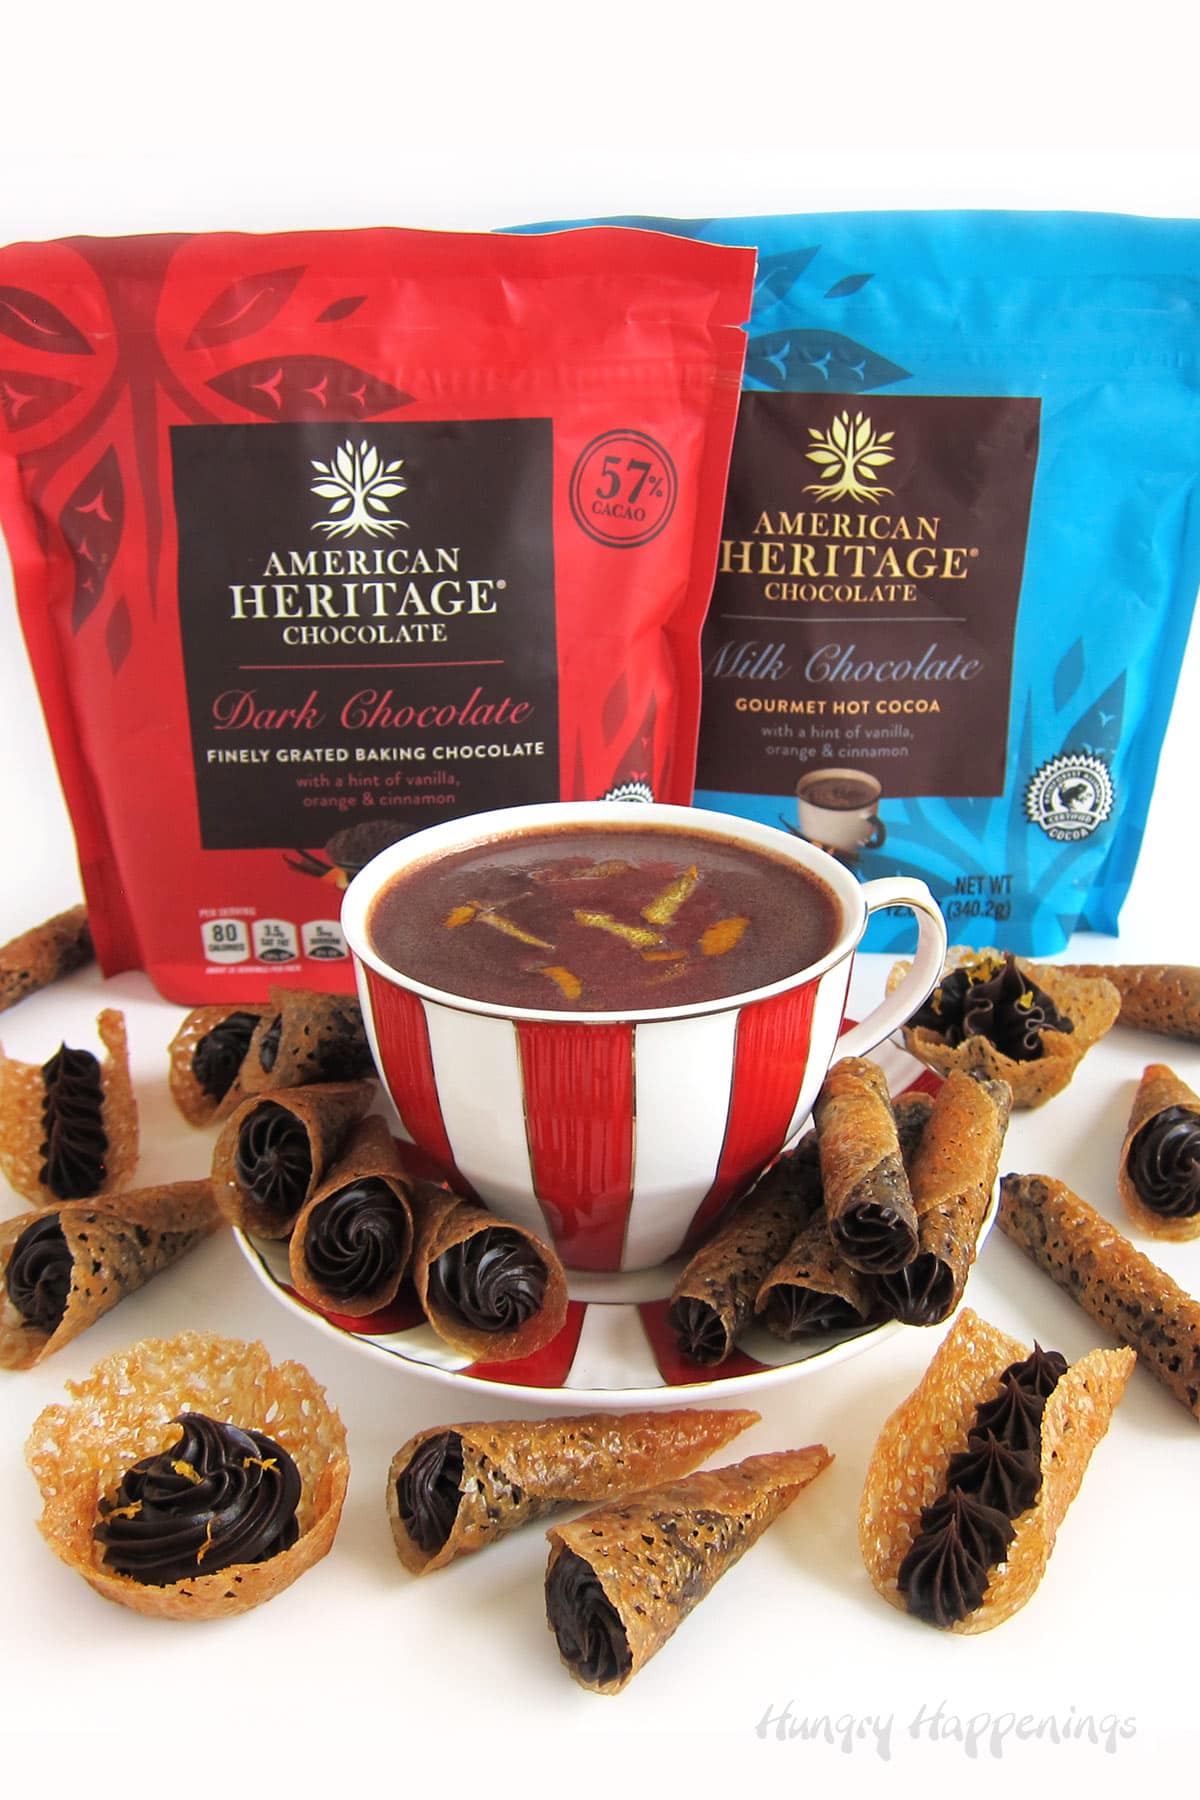 Orange tuile cookies filled with orange chocolate ganache arranged around a cup of American Heritage Hot Chocolate. 